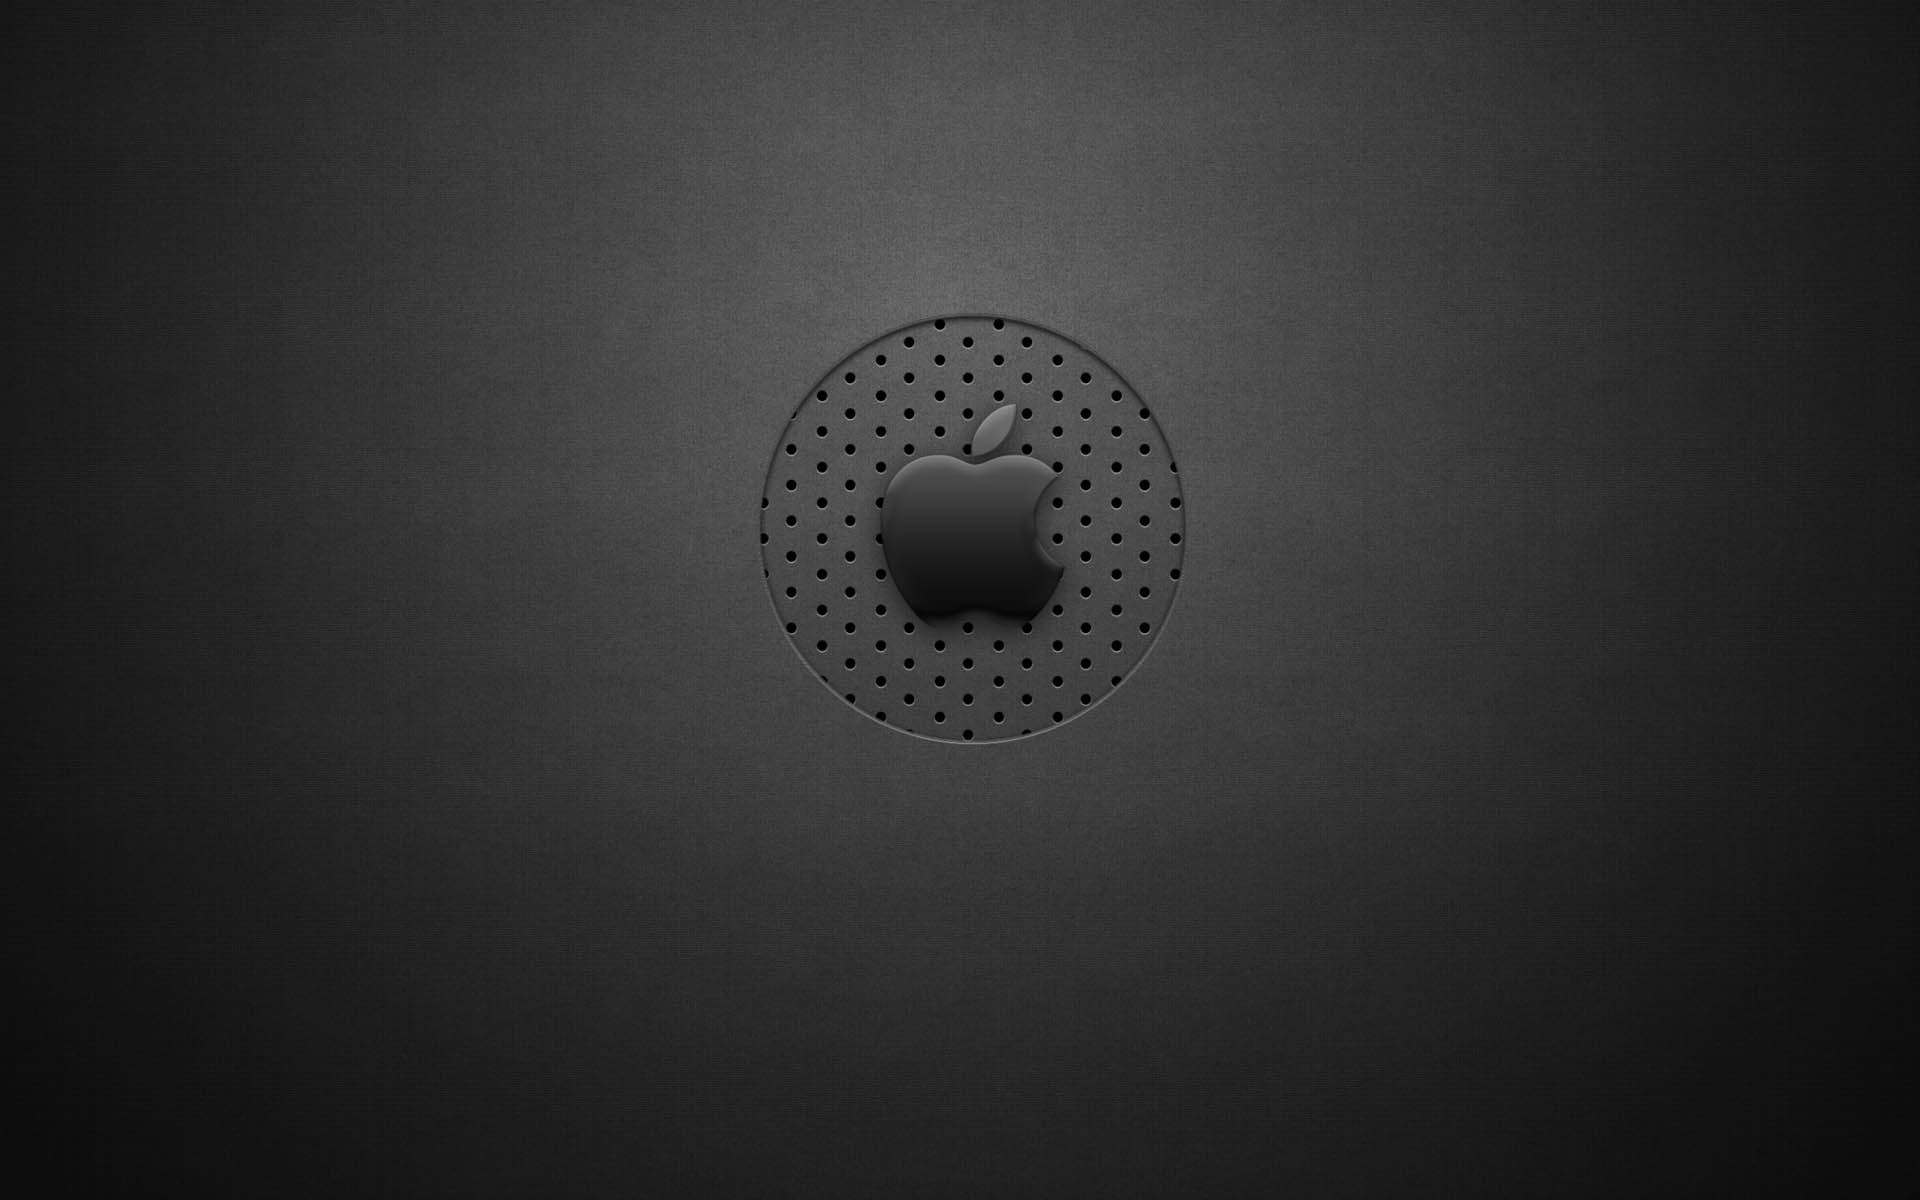 1920x1200 Free wallpapers iPhone and iPod Touch, backgrounds and themes | Metal,  Apple! | Pinterest | Free iphone wallpaper, Wallpaper downloads and  Wallpaper